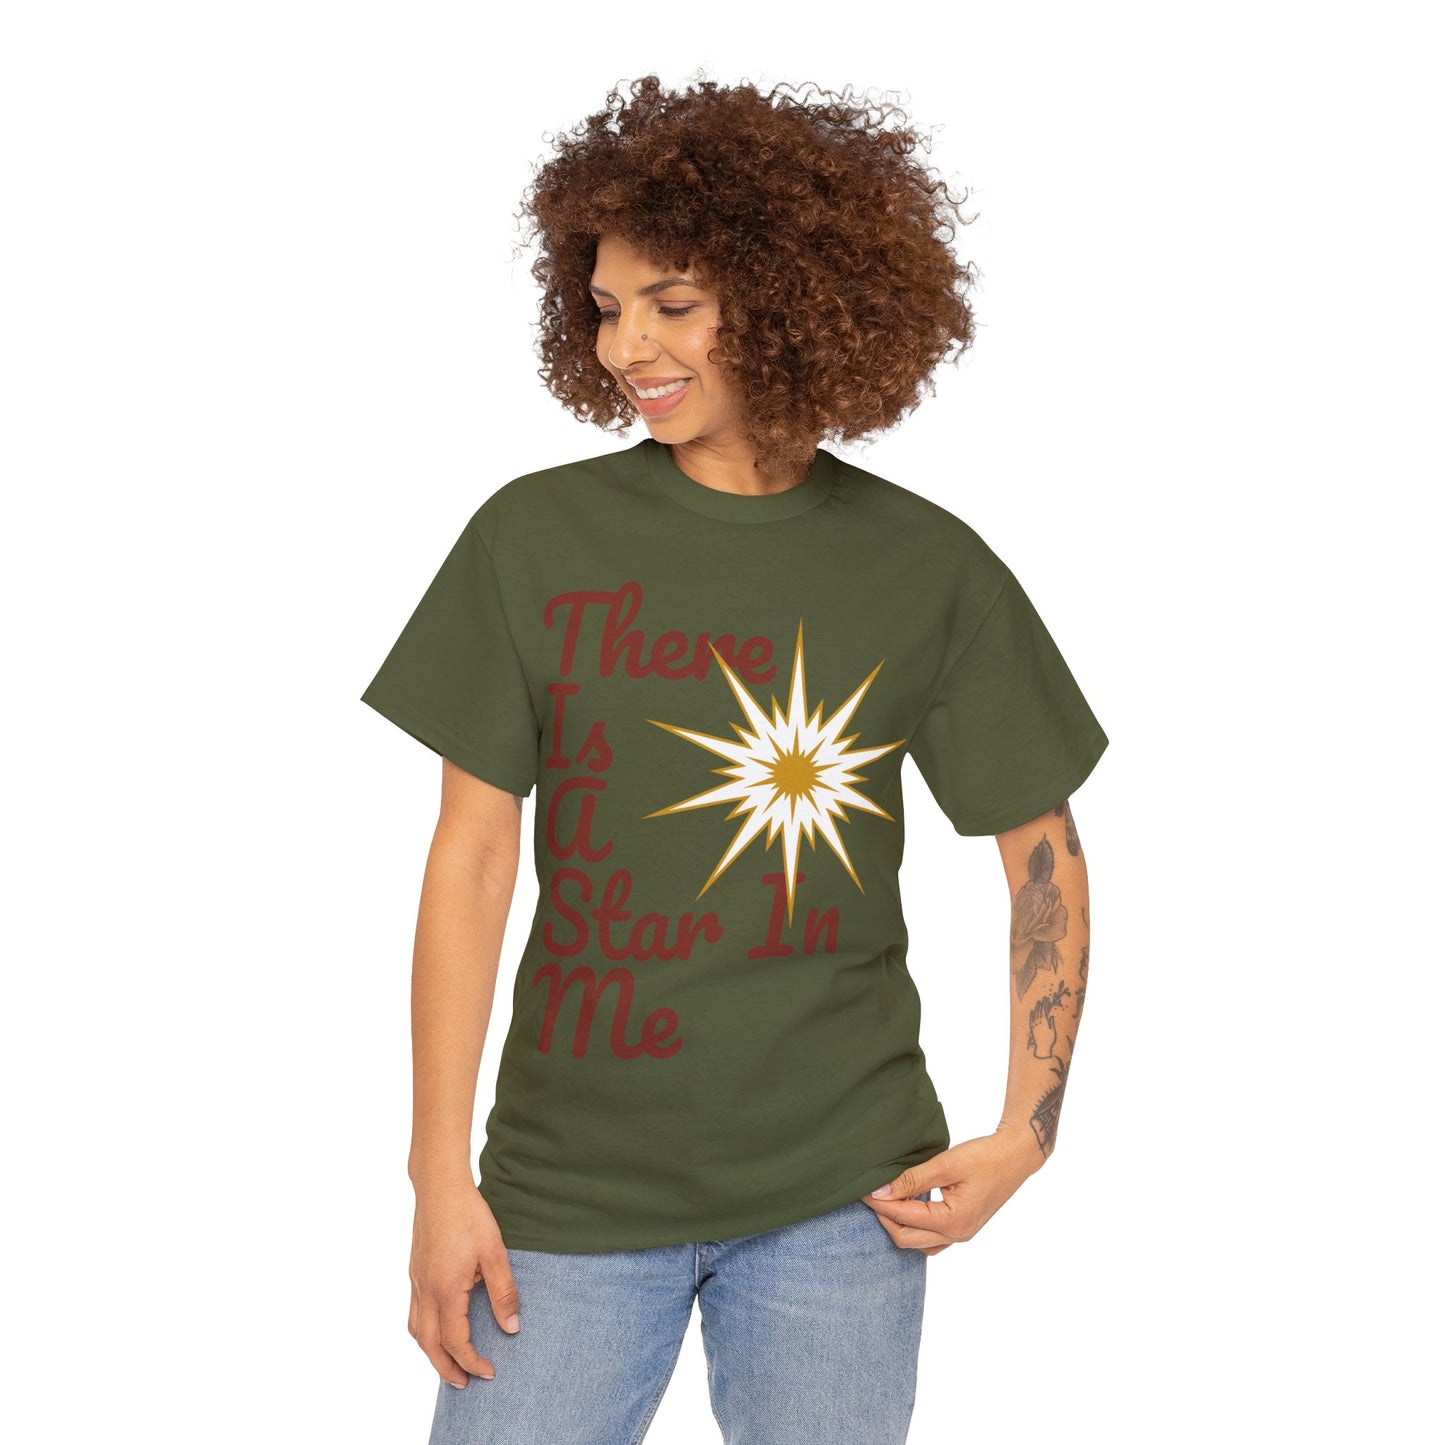 Star Unisex Heavy Cotton Tee  (There Is A Star In Me)